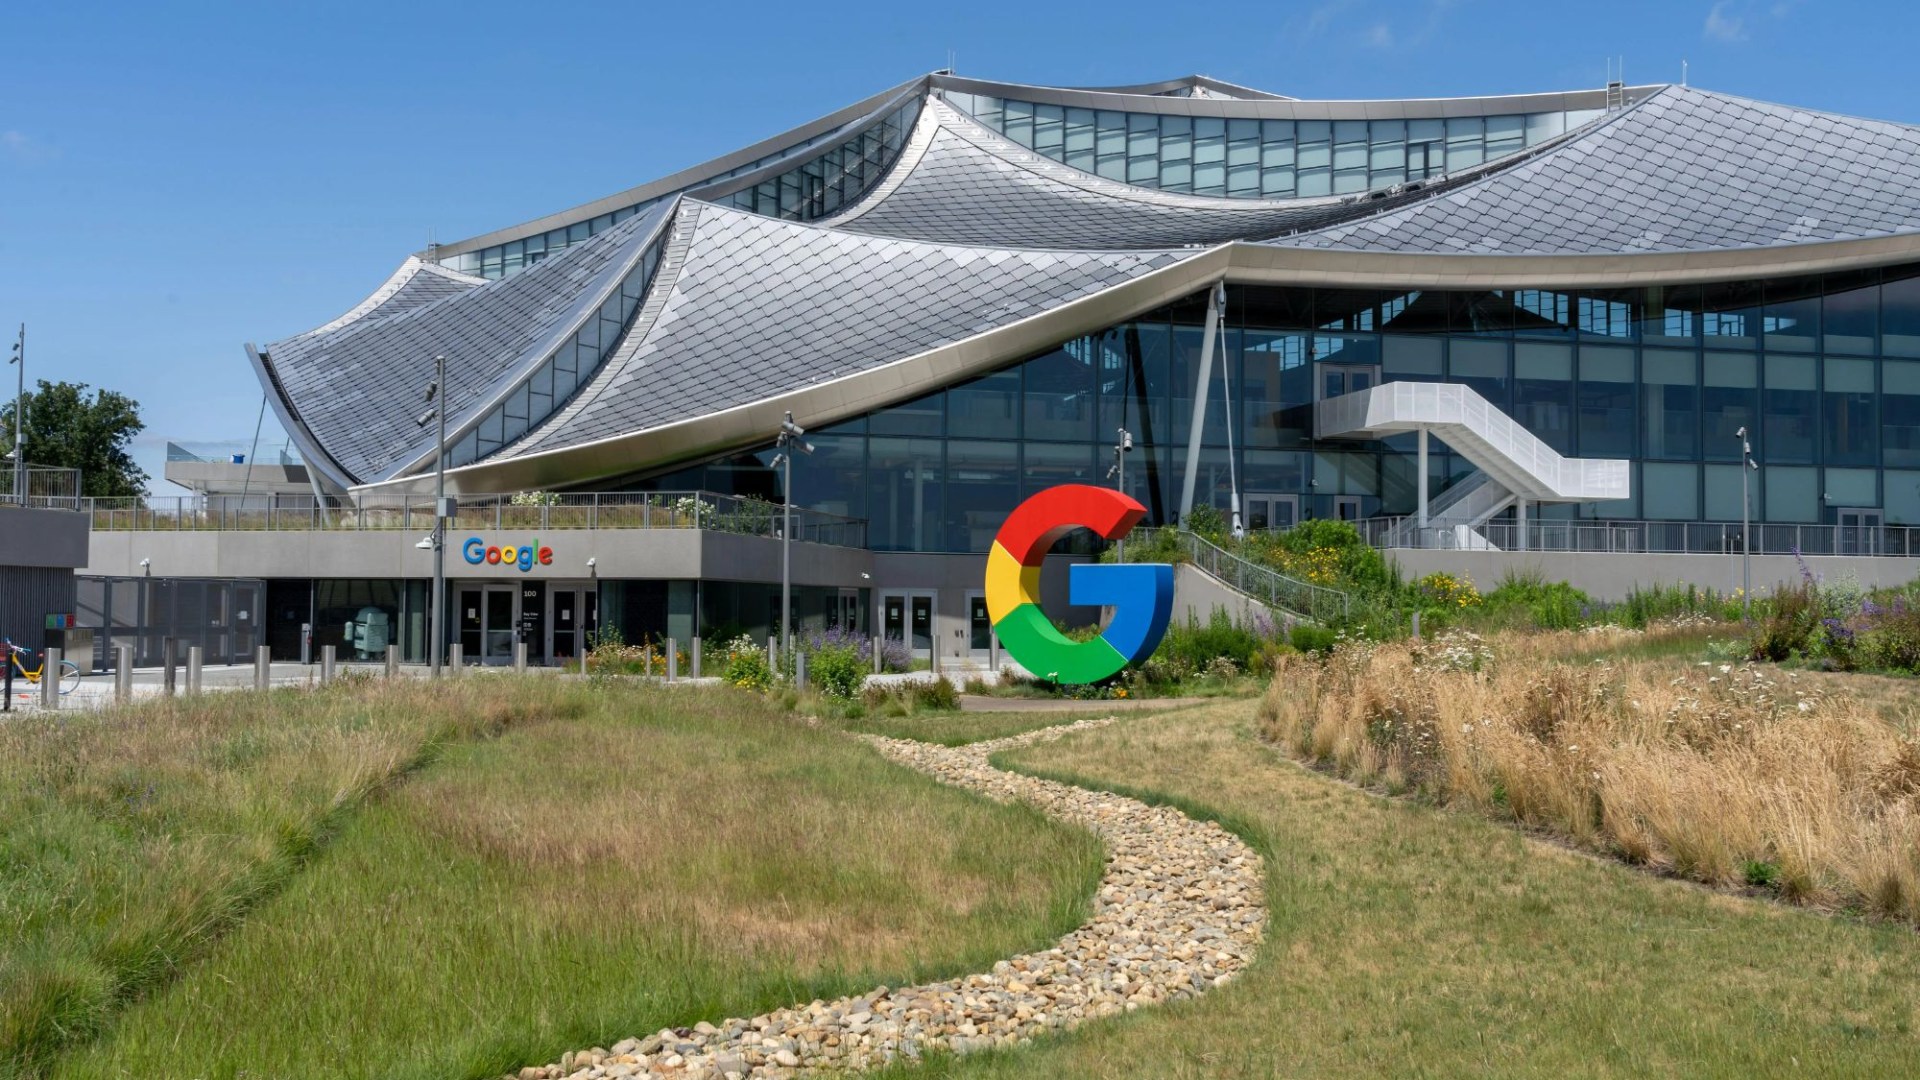 Google’s Silicon Valley Office Plagued by Terrible WiFi – Employees Forced Outdoors to Connect!